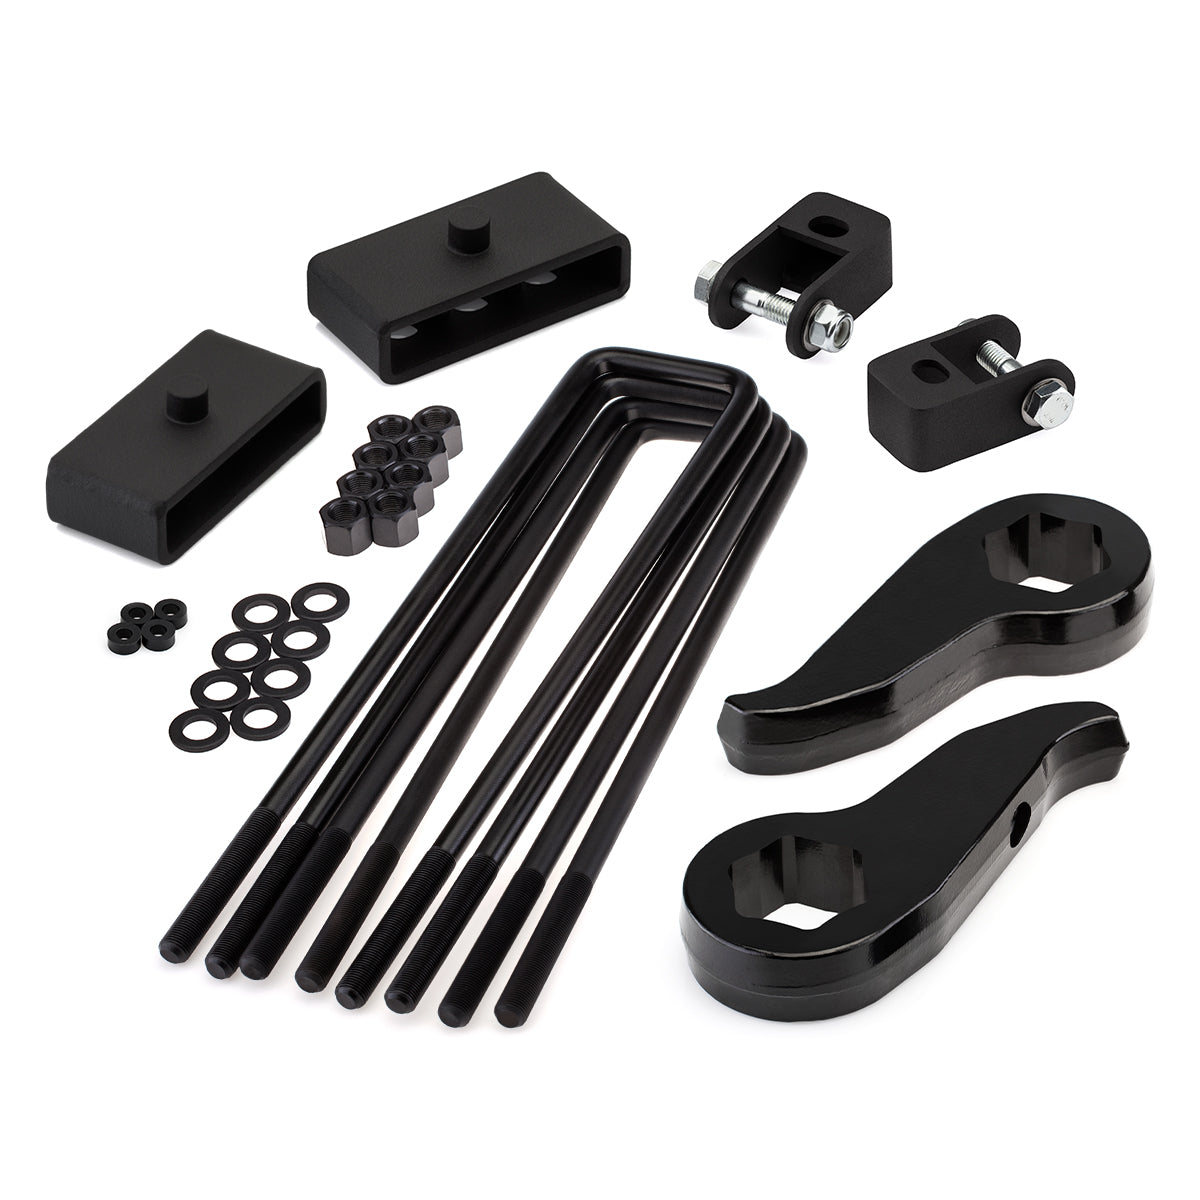 2011-2019 Chevy Silverado 2500HD Full Lift Kit with Shock Extenders